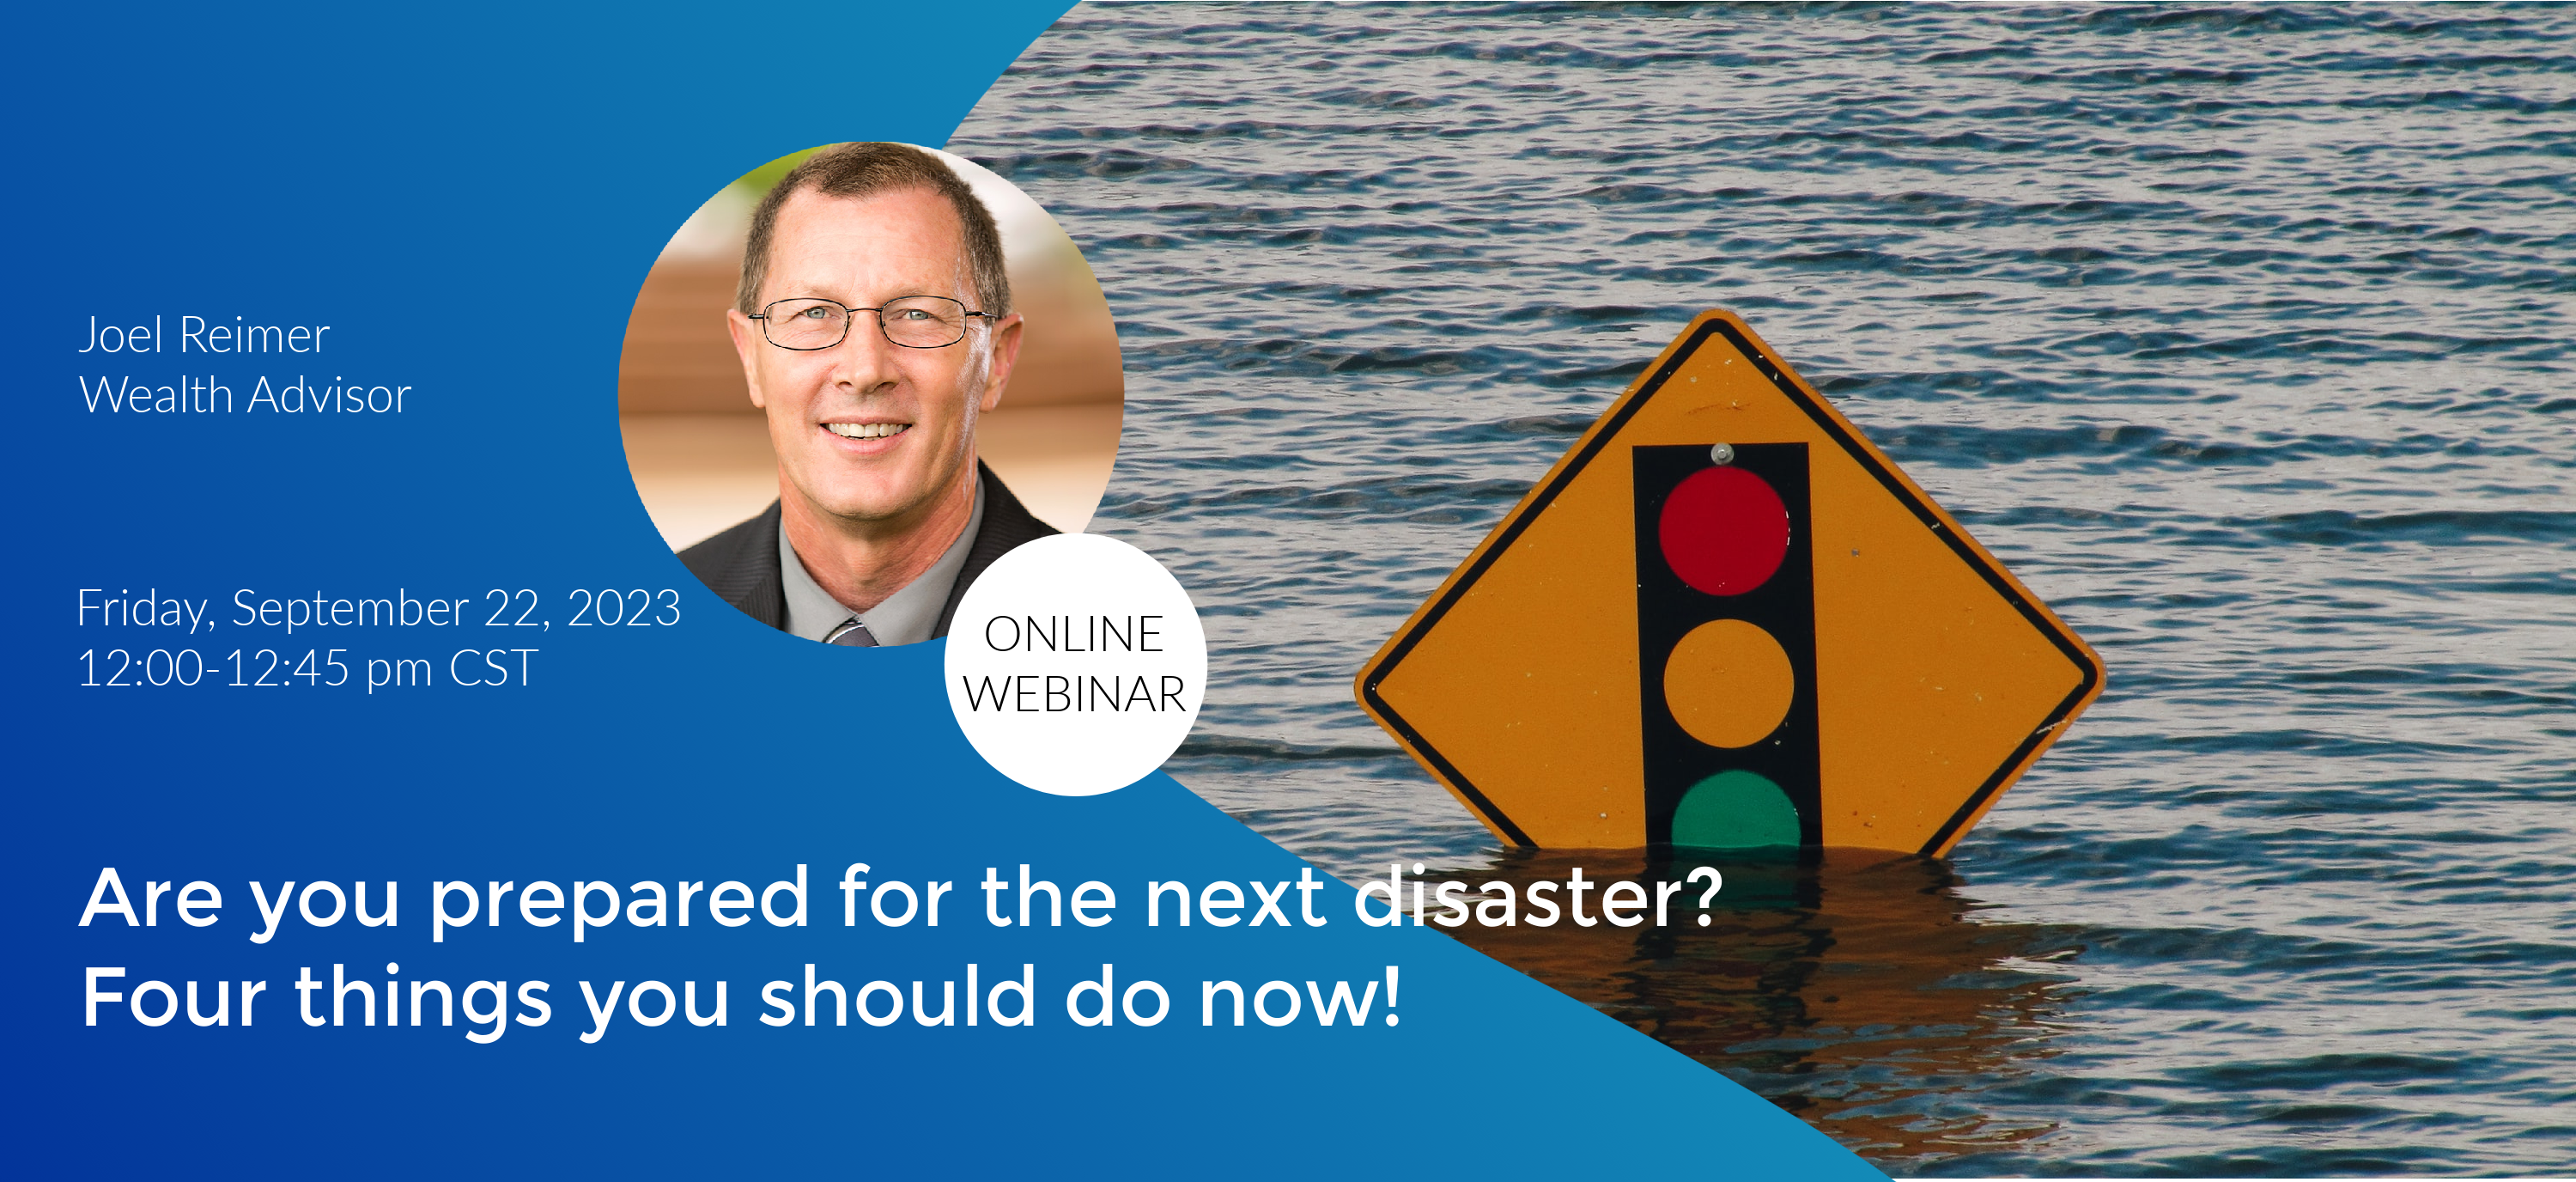 Are you prepared for the next disaster? 4 things you should do now!